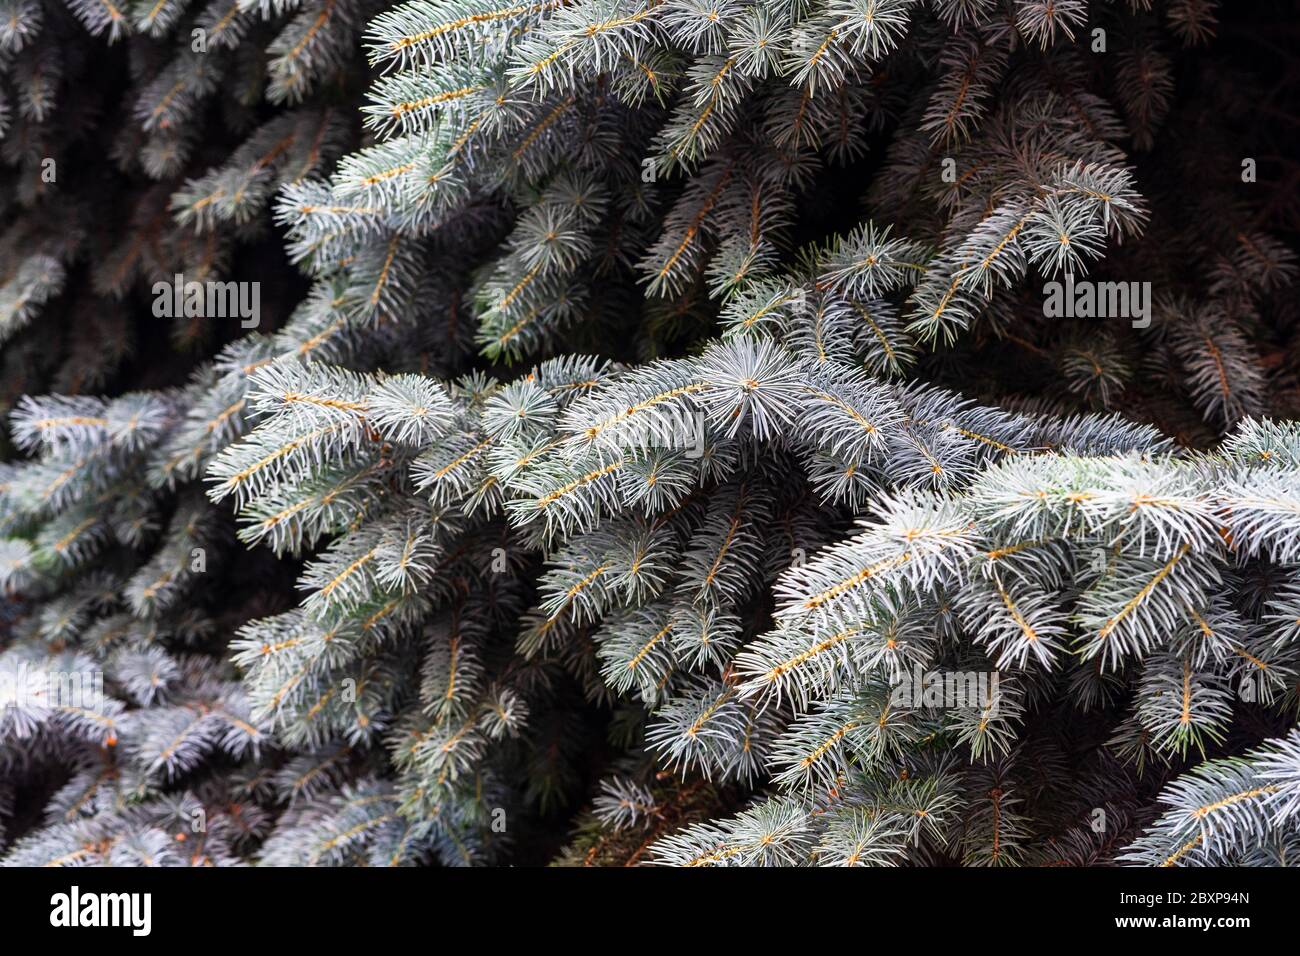 Silver pine tree, silver spruce pine, fir tree brunches closeup photo Stock Photo